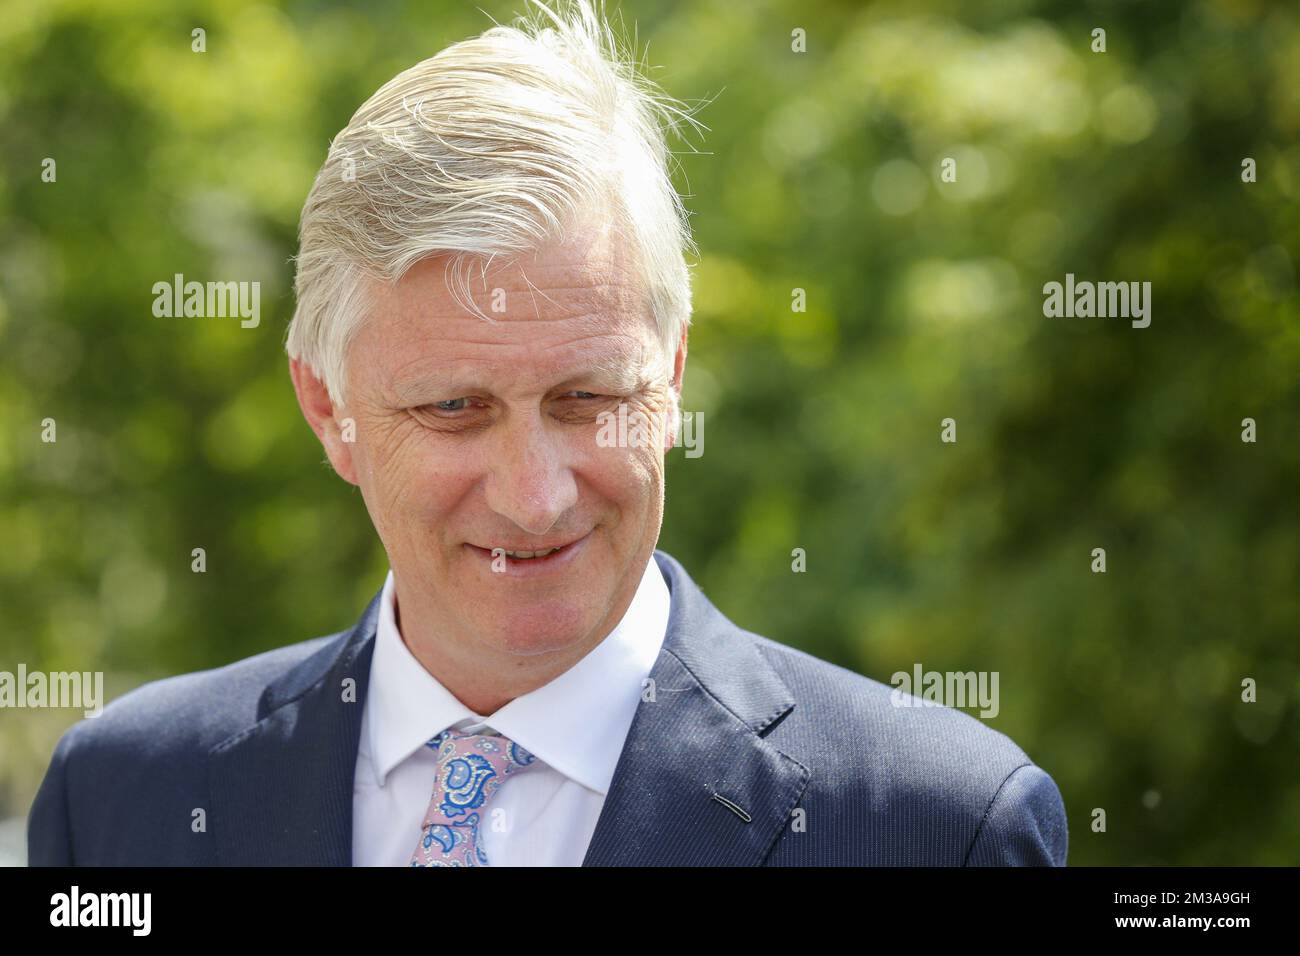 King Philippe - Filip of Belgium pictured during a ceremony to award the 'Francqui Prize' scientifi awards for 2021 and 2022, Wednesday 01 June 2022 in Brussels. The 2021 prize is awarded to ULiege astrologist Michael Gillon, ULiege's Veerle Rots will receive the 2022 one for her Palaeolithic Stone Tool Hafting research. The scientific prize, which is often referred to as the 'Belgian Nobel Prize', is awarded by The Francqui Foundation and is worth 250.000 euros. BELGA PHOTO NICOLAS MAETERLINCK Stock Photo